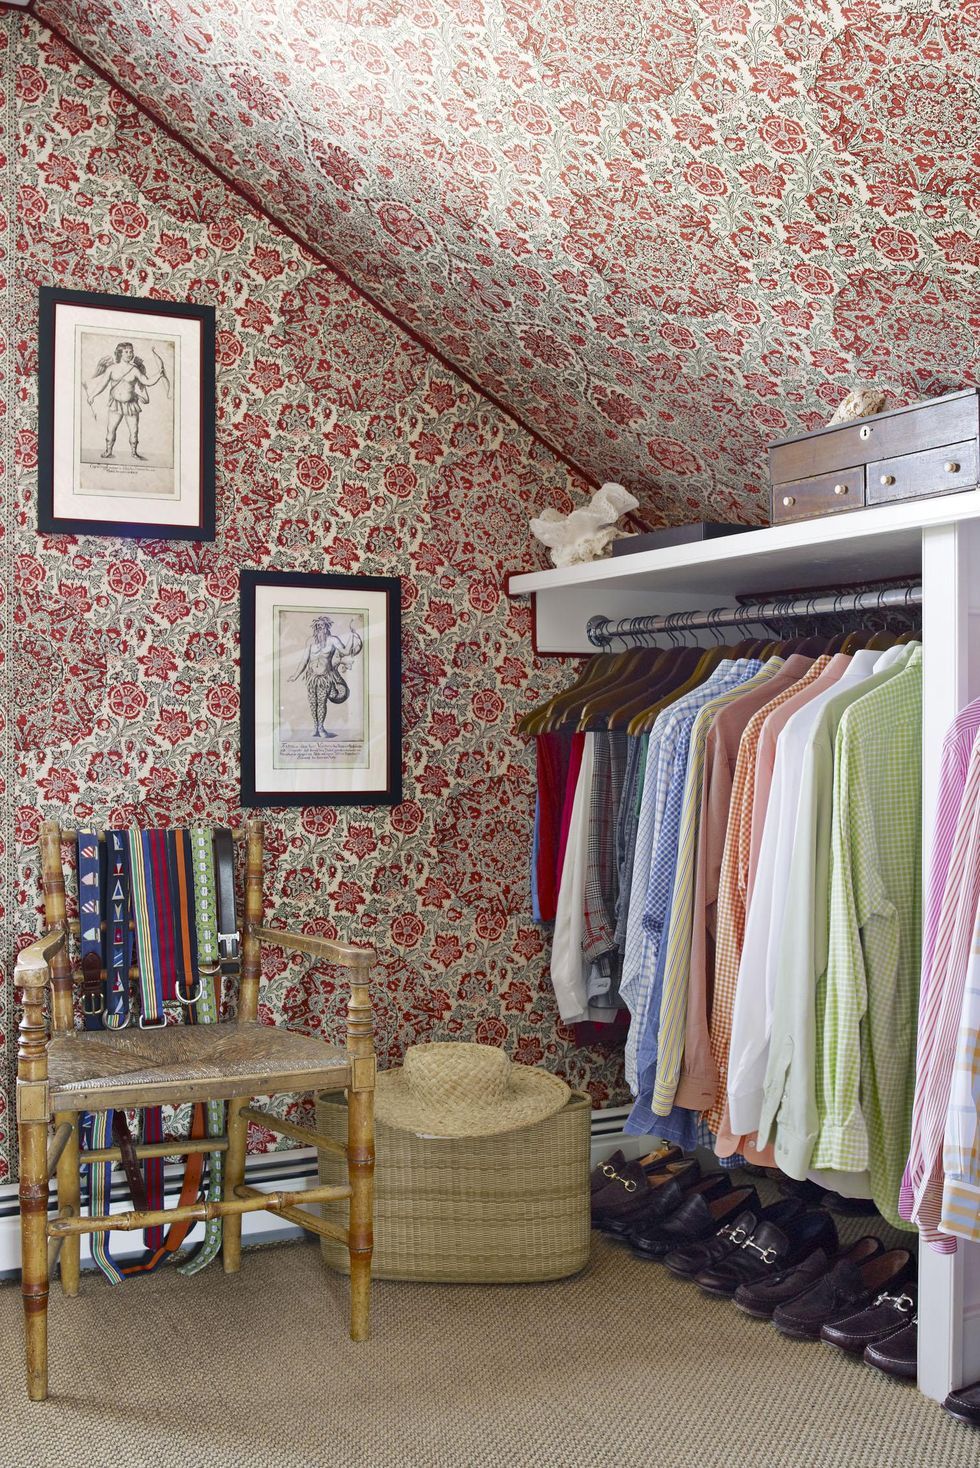 33 Storage Ideas to Organize Your Closet and Decorate with Handbags and  Purses